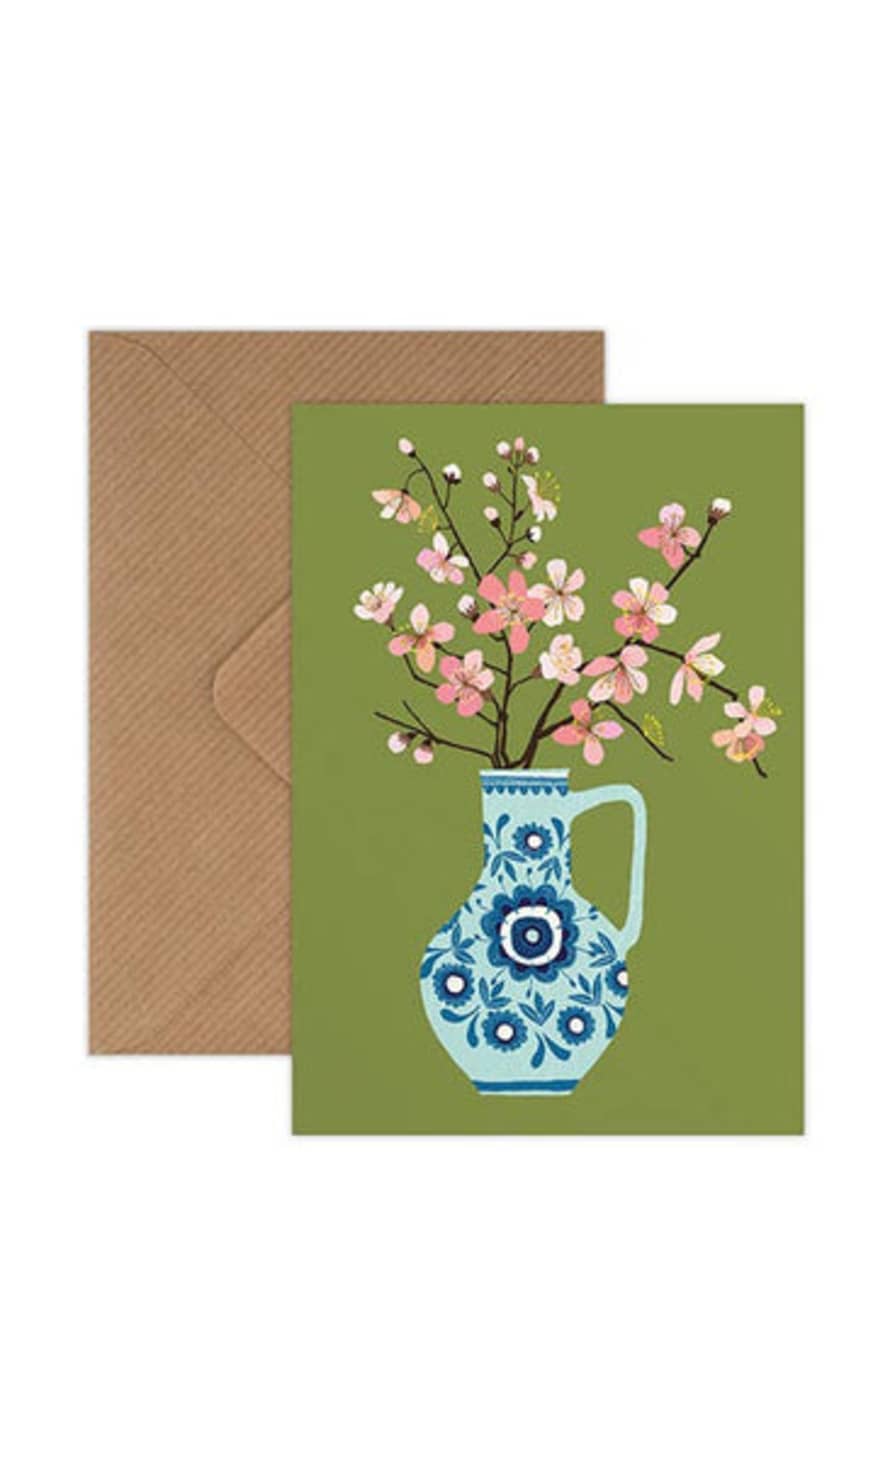 Brie Harrison  Cherry Blossom Greetings Card